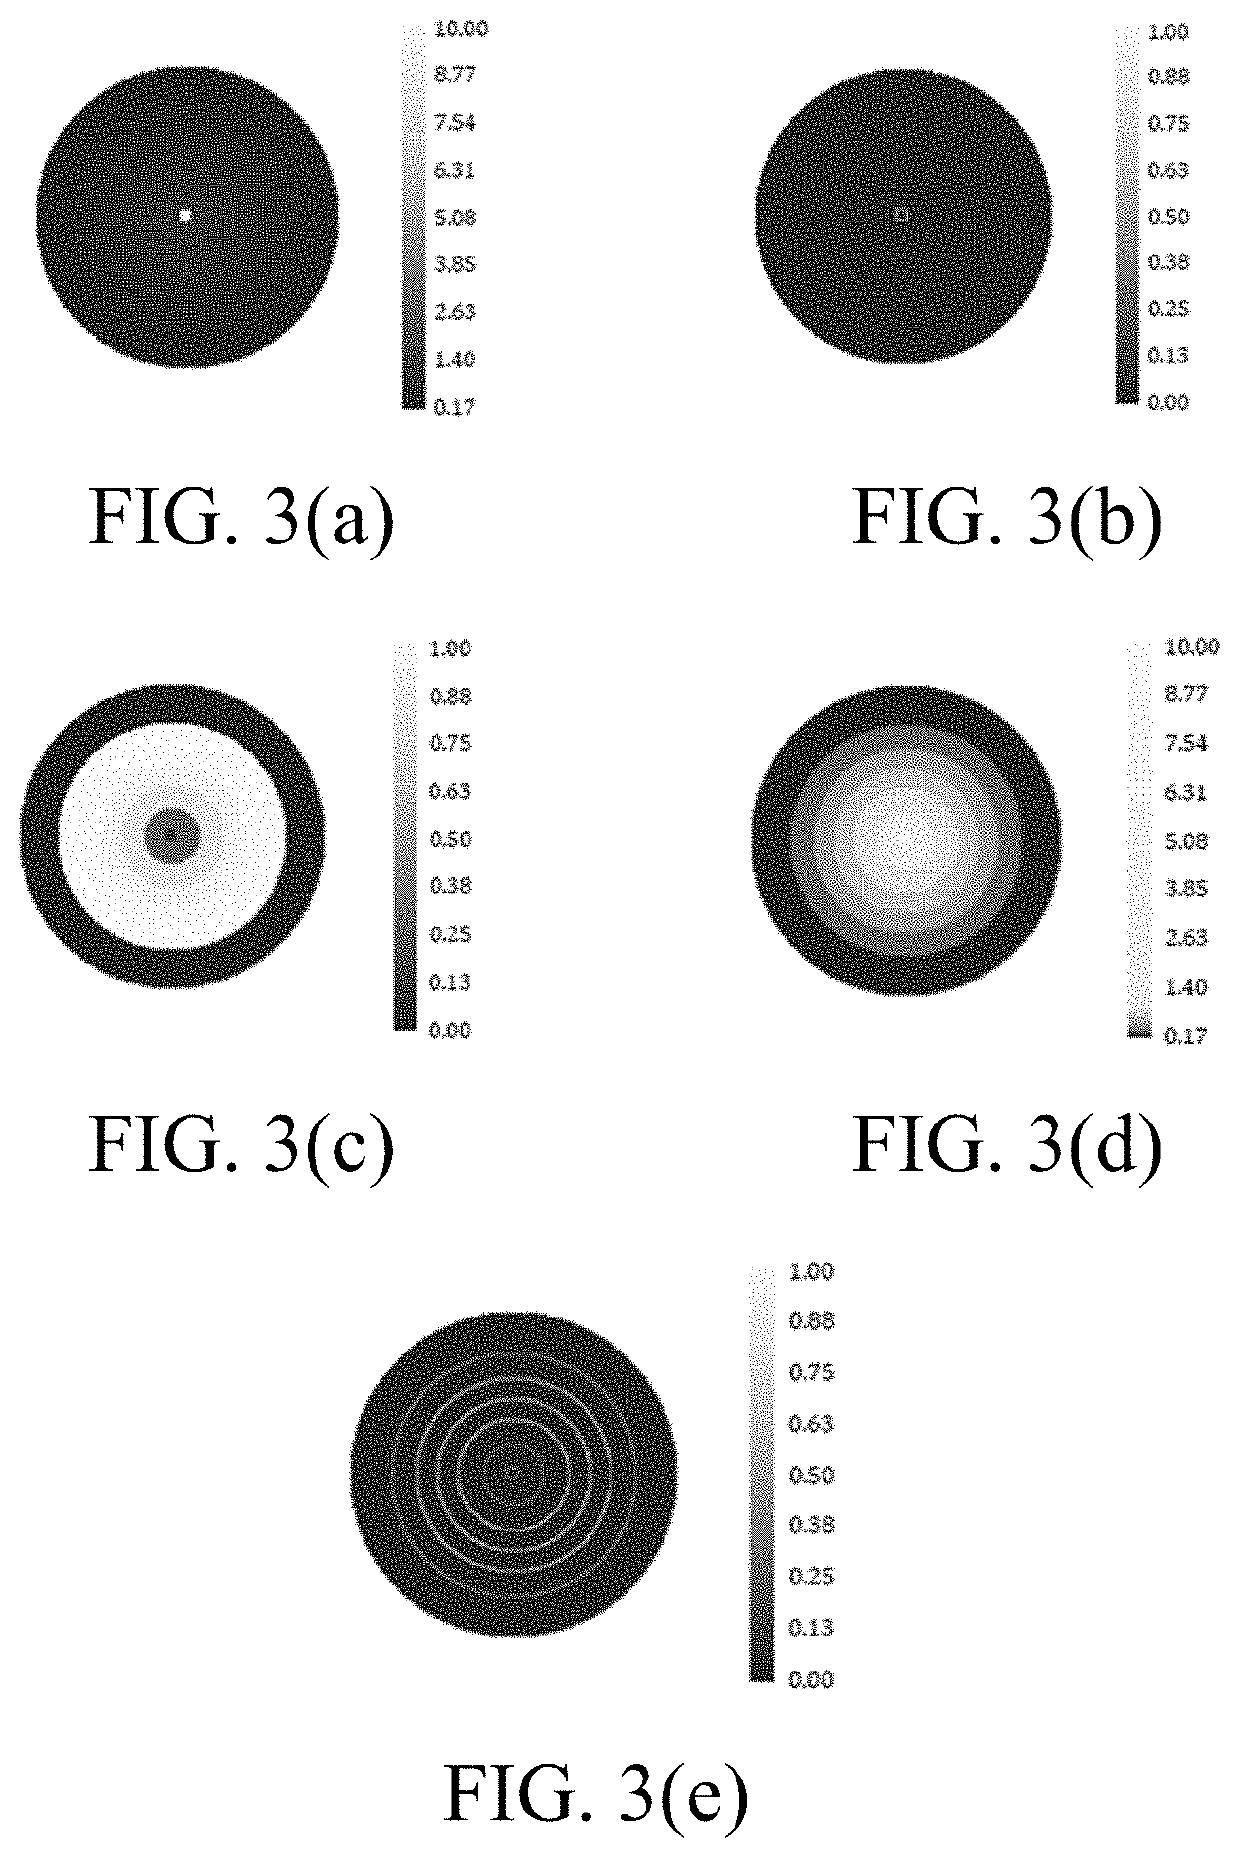 Two-dimensional scalar field data visualization method and system based on colormap optimization